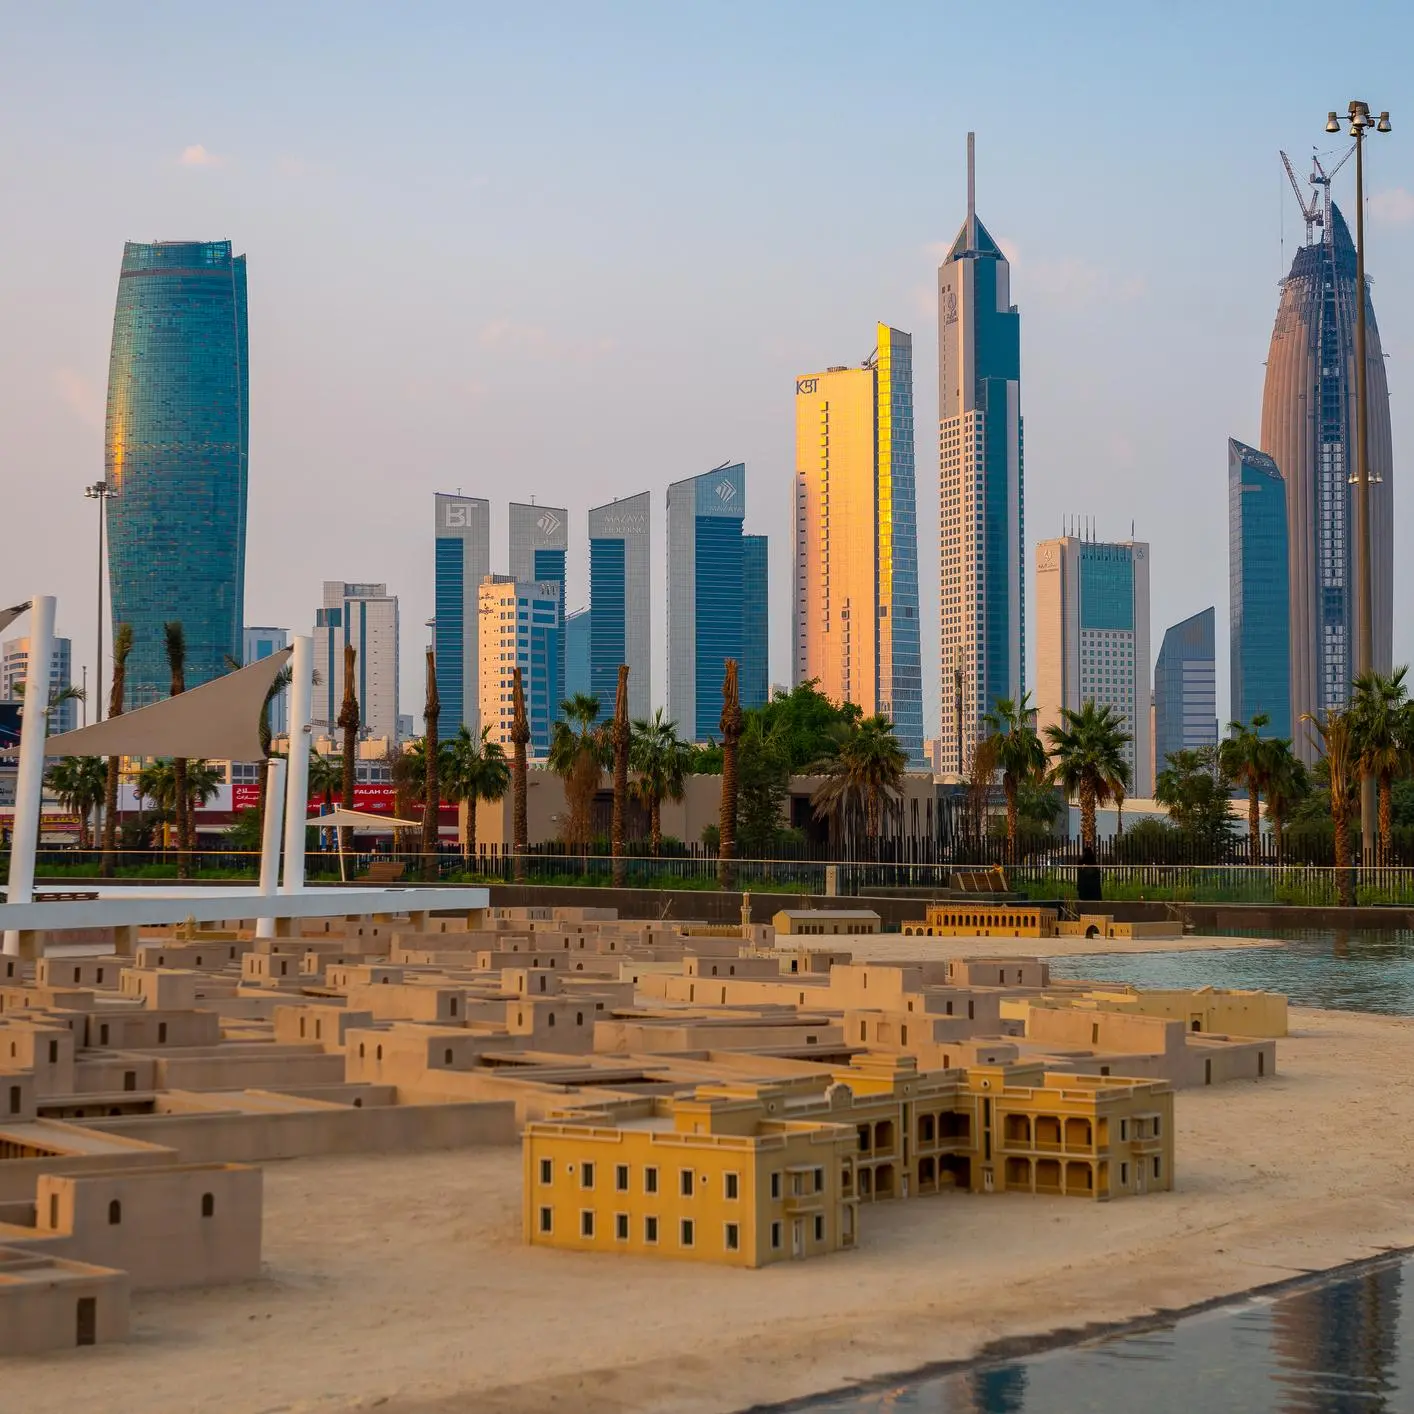 Kuwait's Agility confirms rejection of John Menzies takeover bid